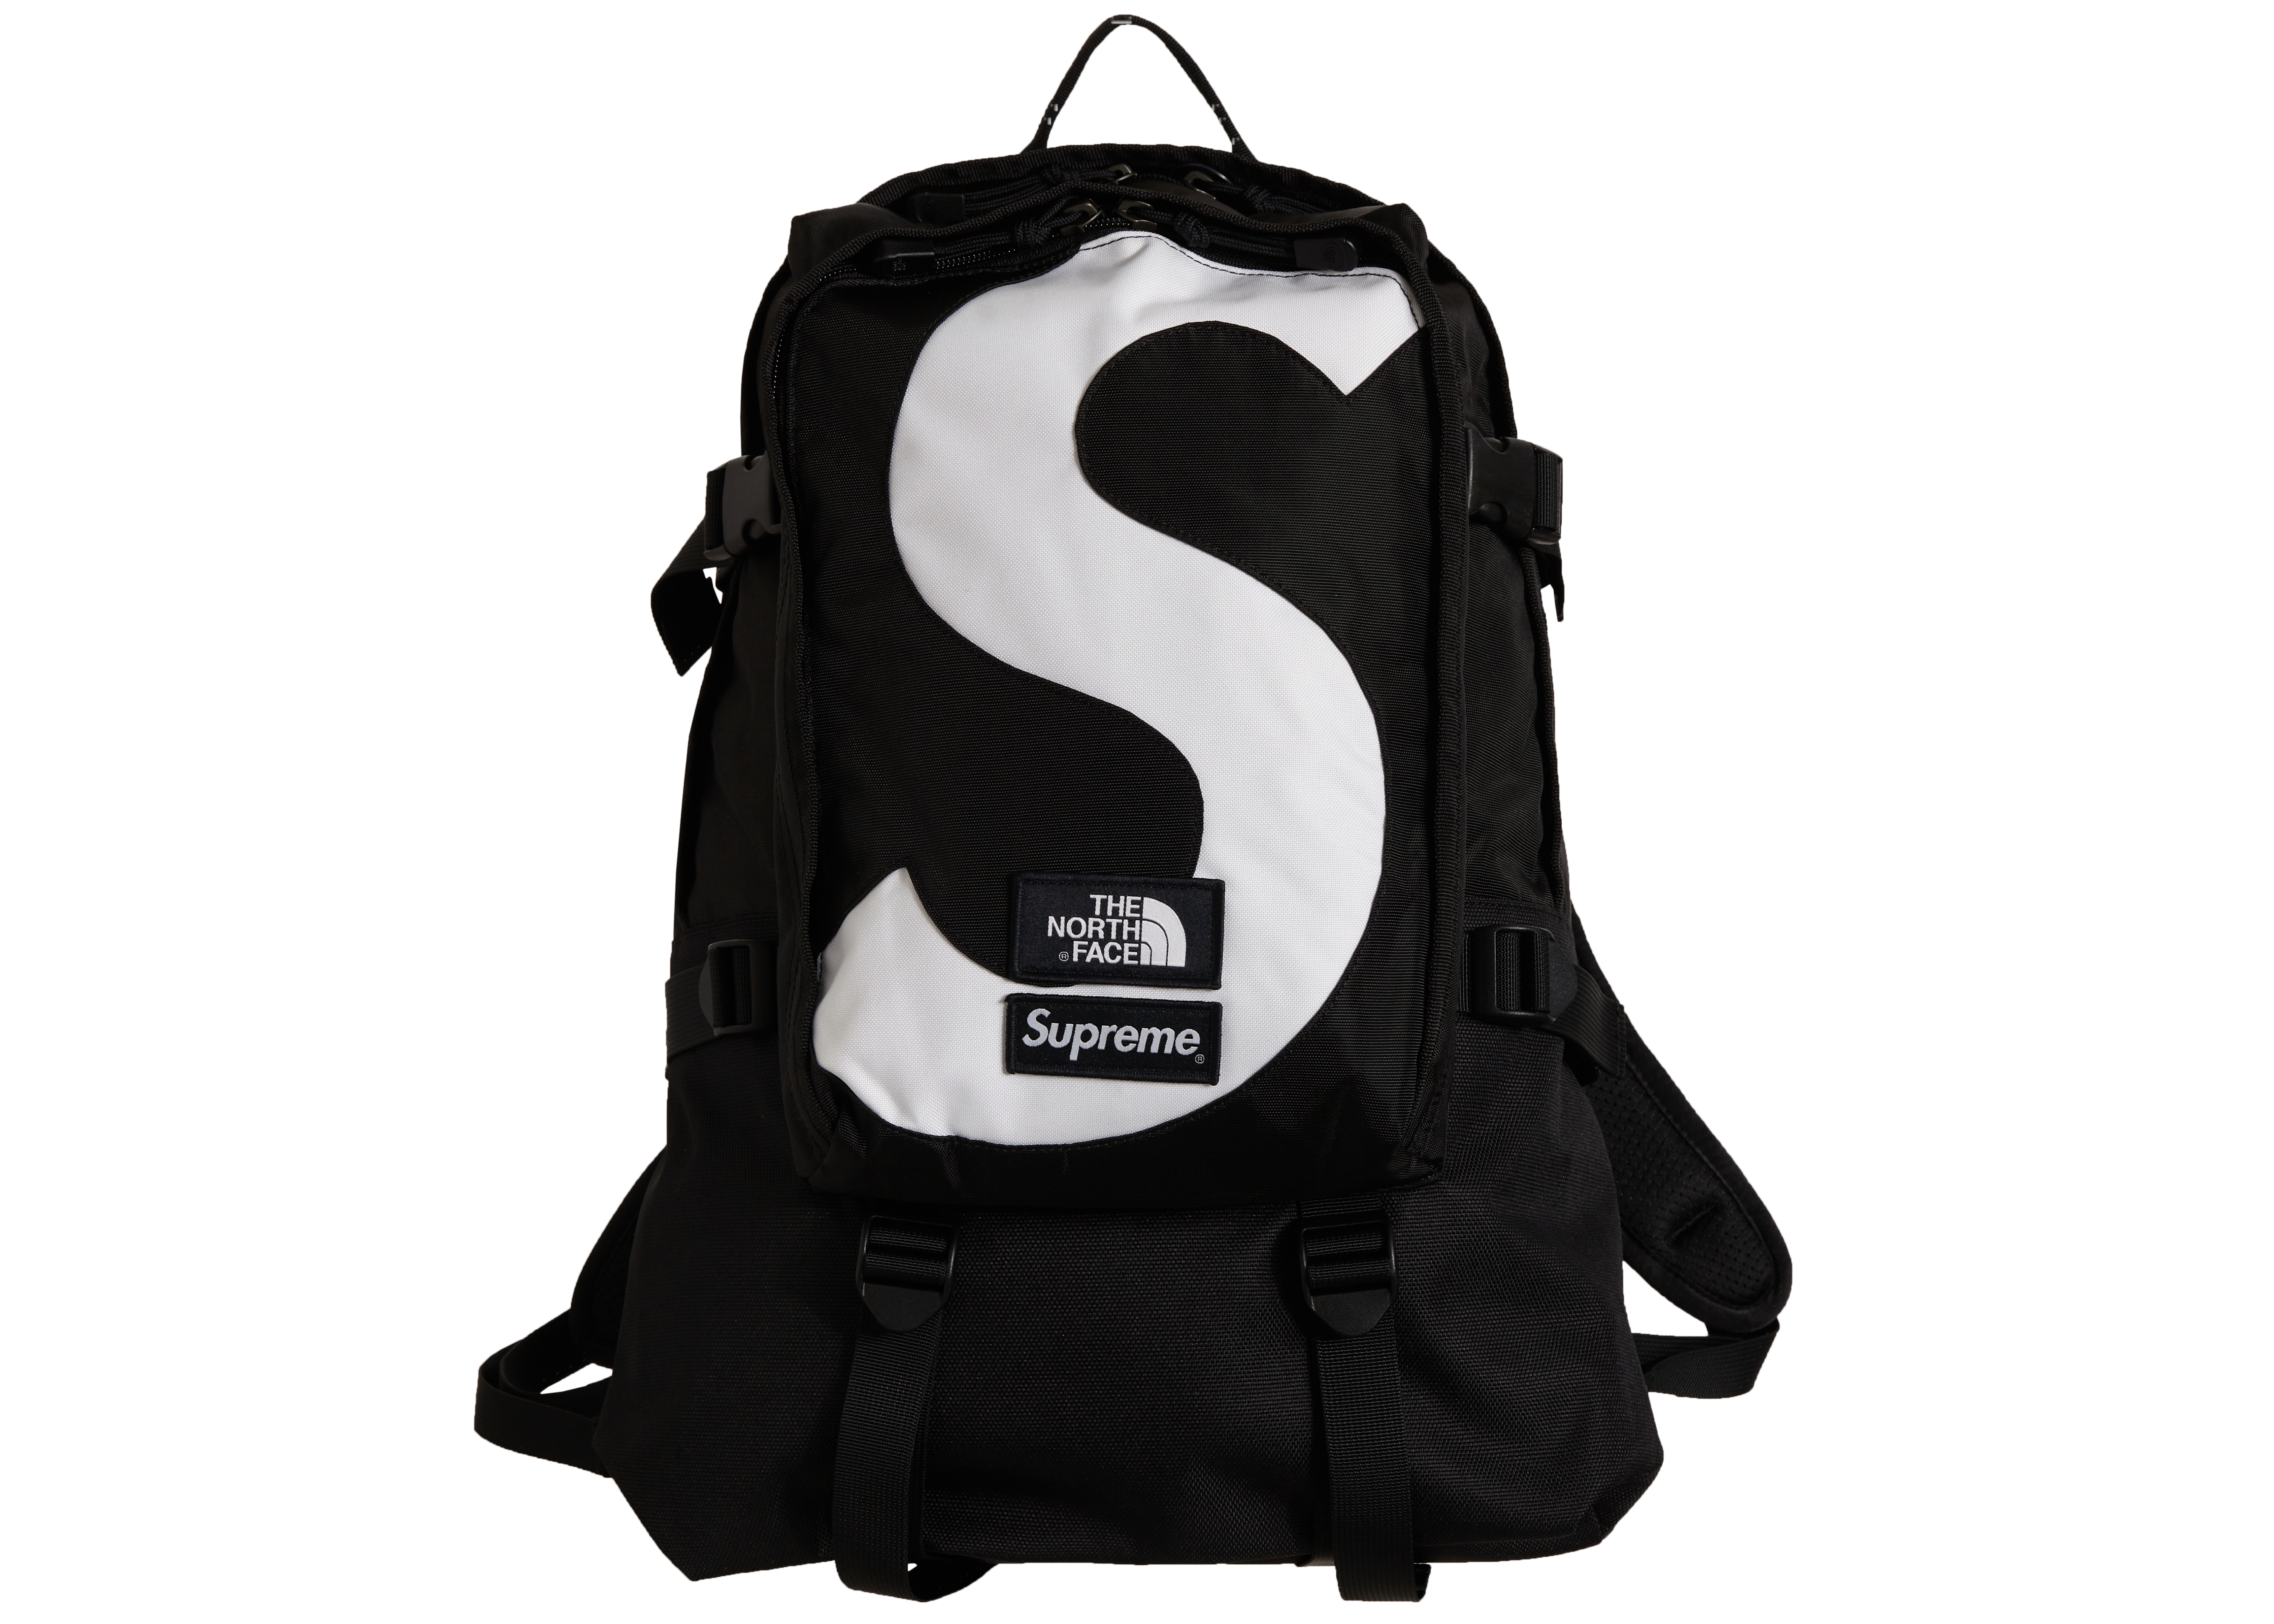 where can you get a north face backpack